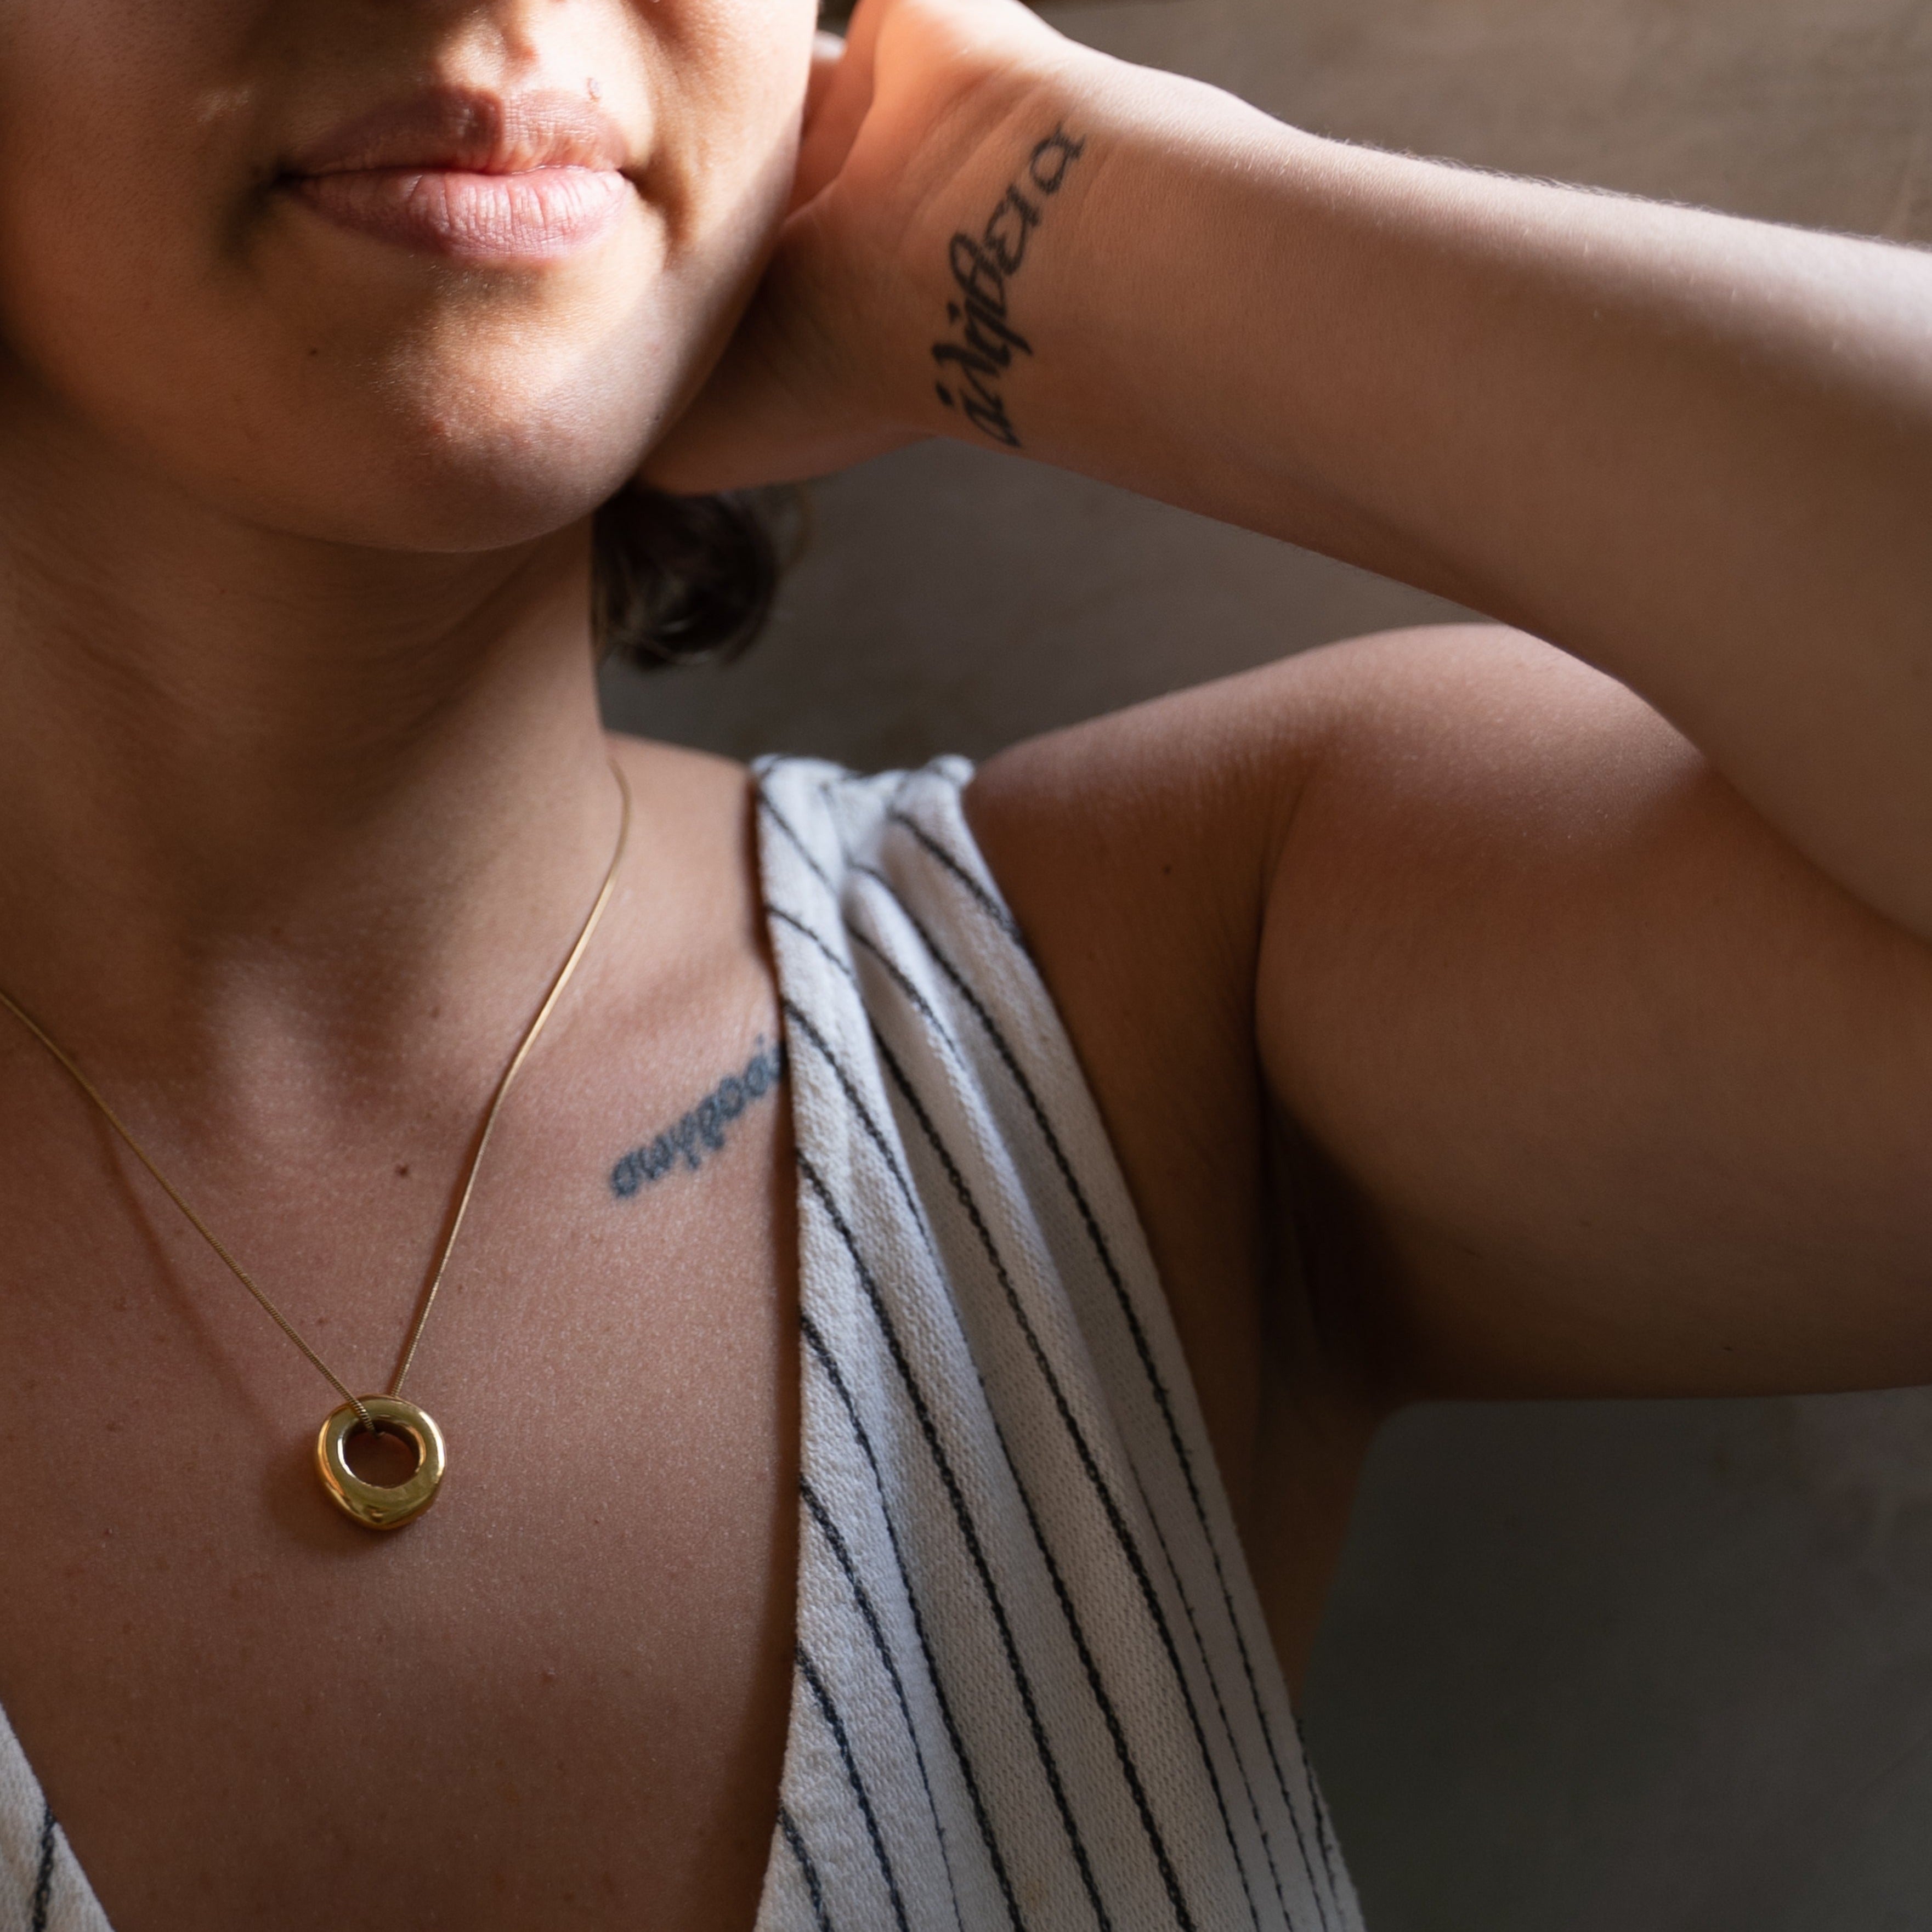 Introducing you to the bestseller, the Eloise necklace designed and created by MeganCollinsJewellery. Subtly combing Scandinavian geometric minimalism with a hint of the organic. 